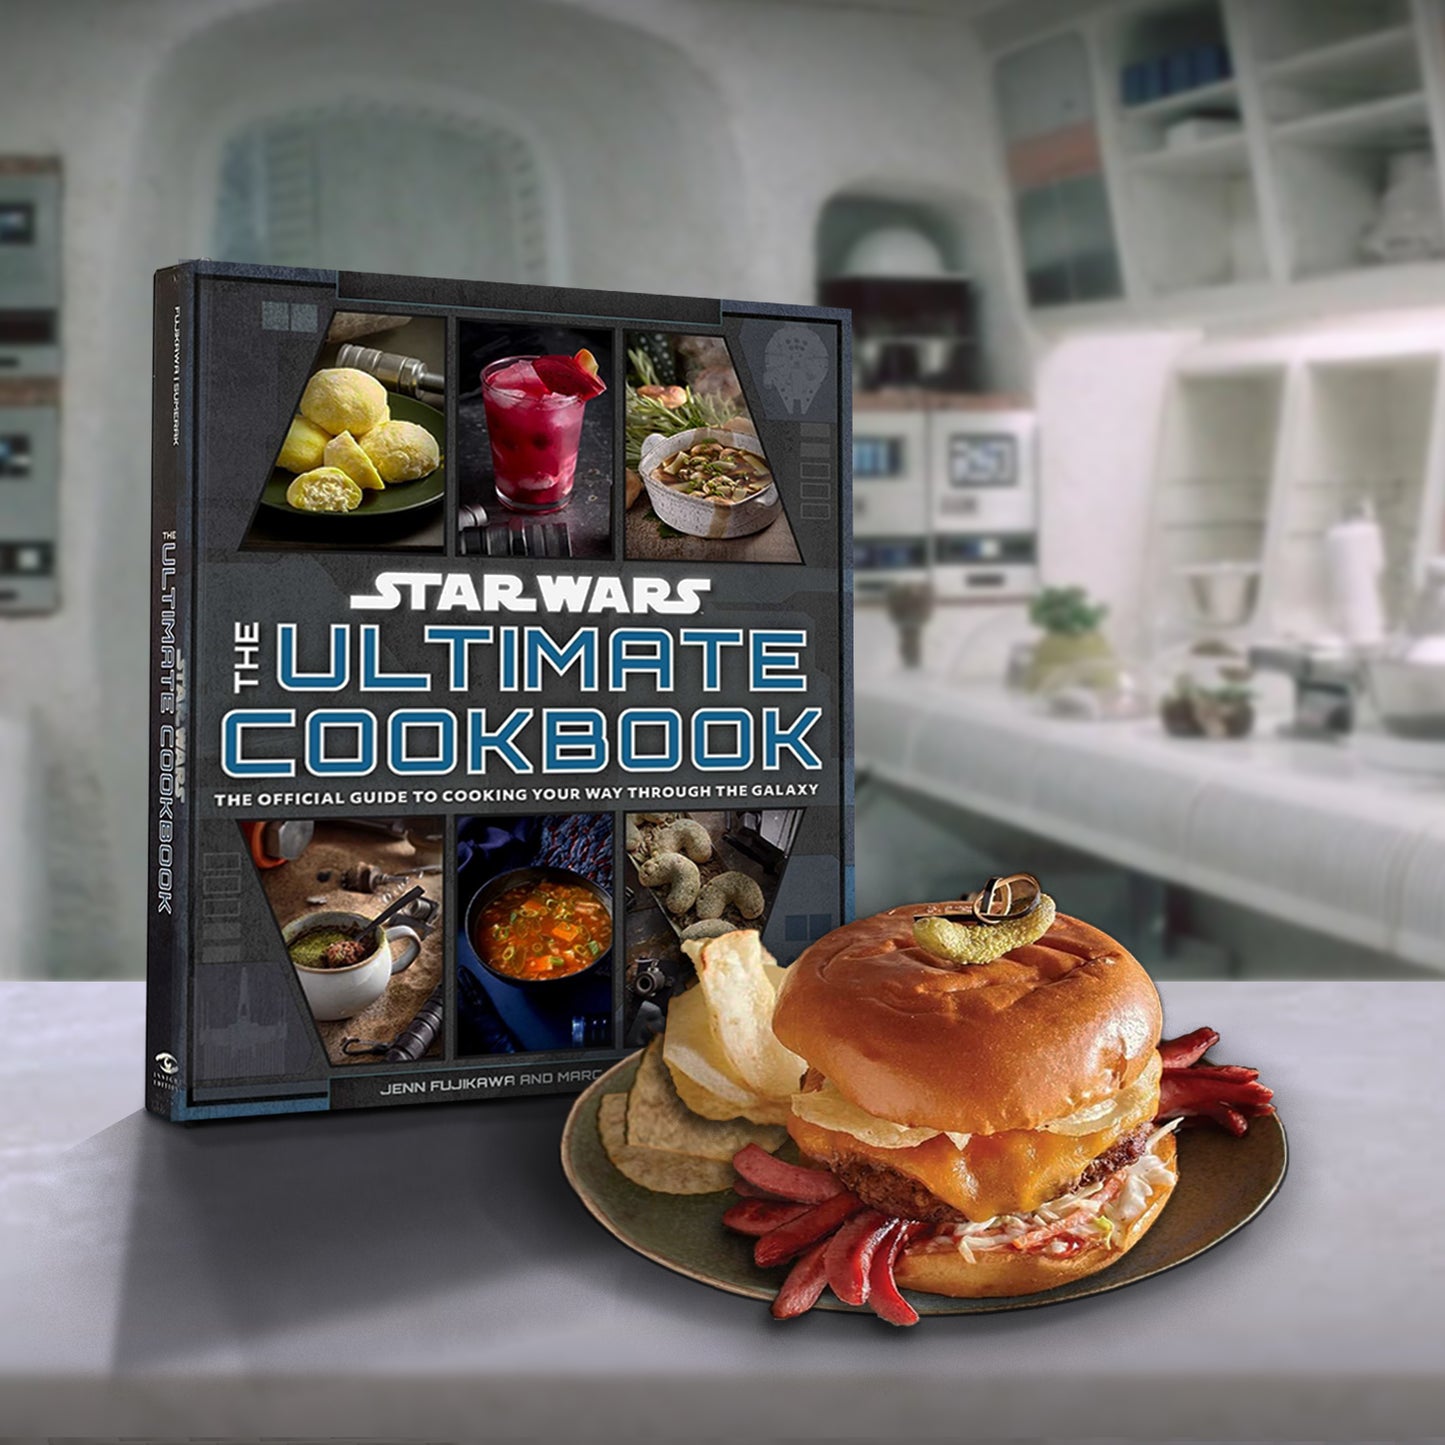 An gray book white marble table. On the front in white and blue text is "Star wars, the ultimate cookbook. The official guide to cooking your way through the galaxy." At the top and bottom are images of some of the recipes in the book. Next to the book is a cheeseburger on a plate. Behind the book is a futuristic-looking kitchen with white surfaces and appliances.